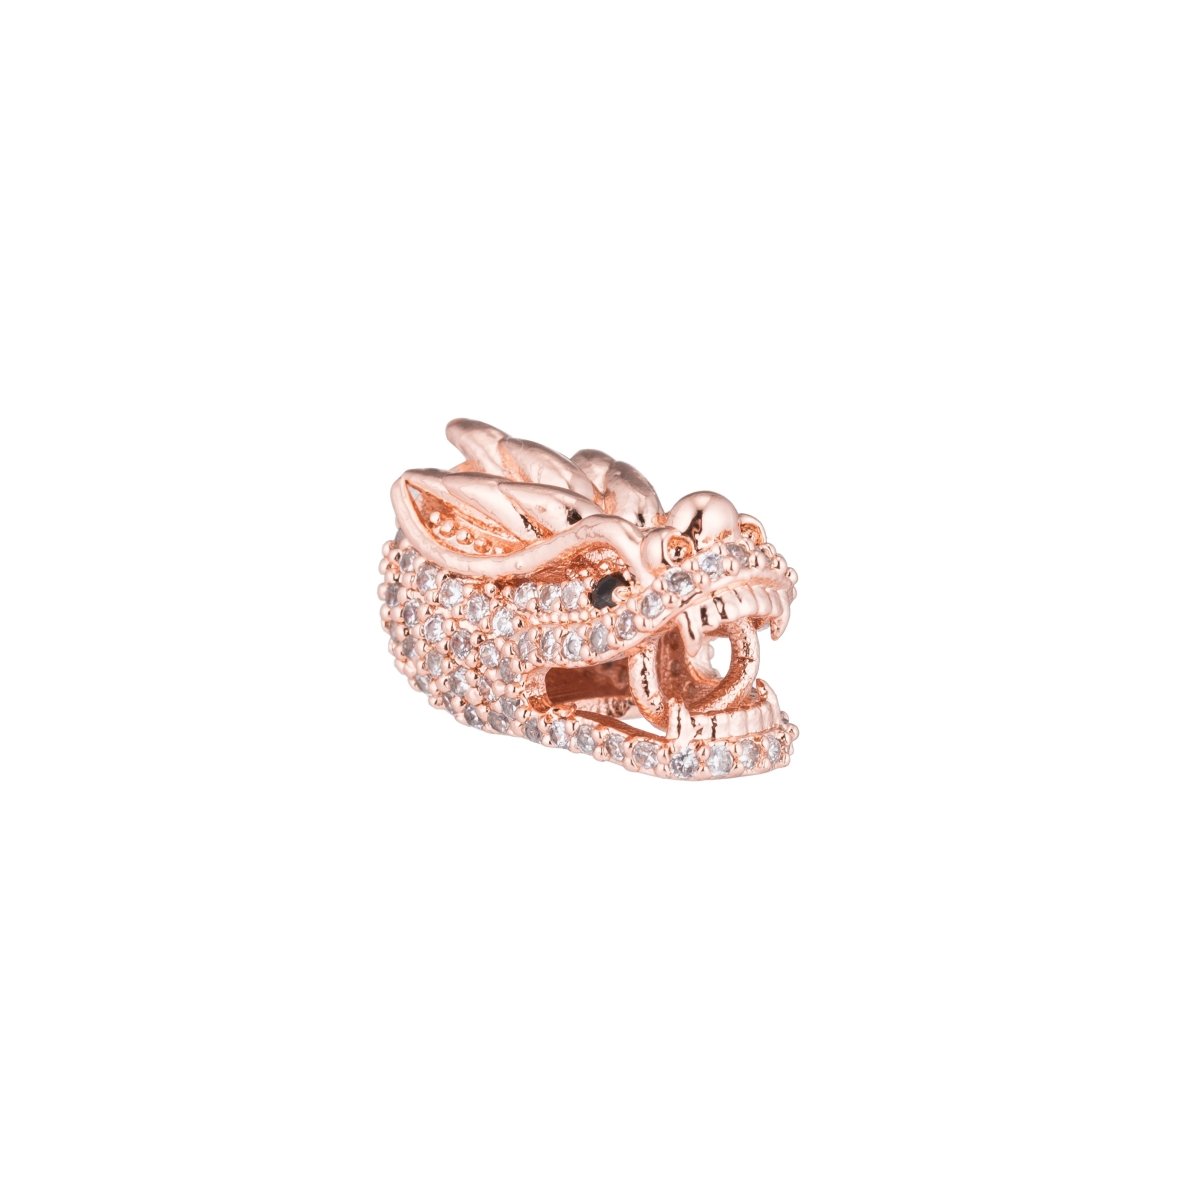 On Sale! CLEARANCE! Gold Filled Micro Paved CZ Mythical Dragon Spacer Bead | B-075 - DLUXCA